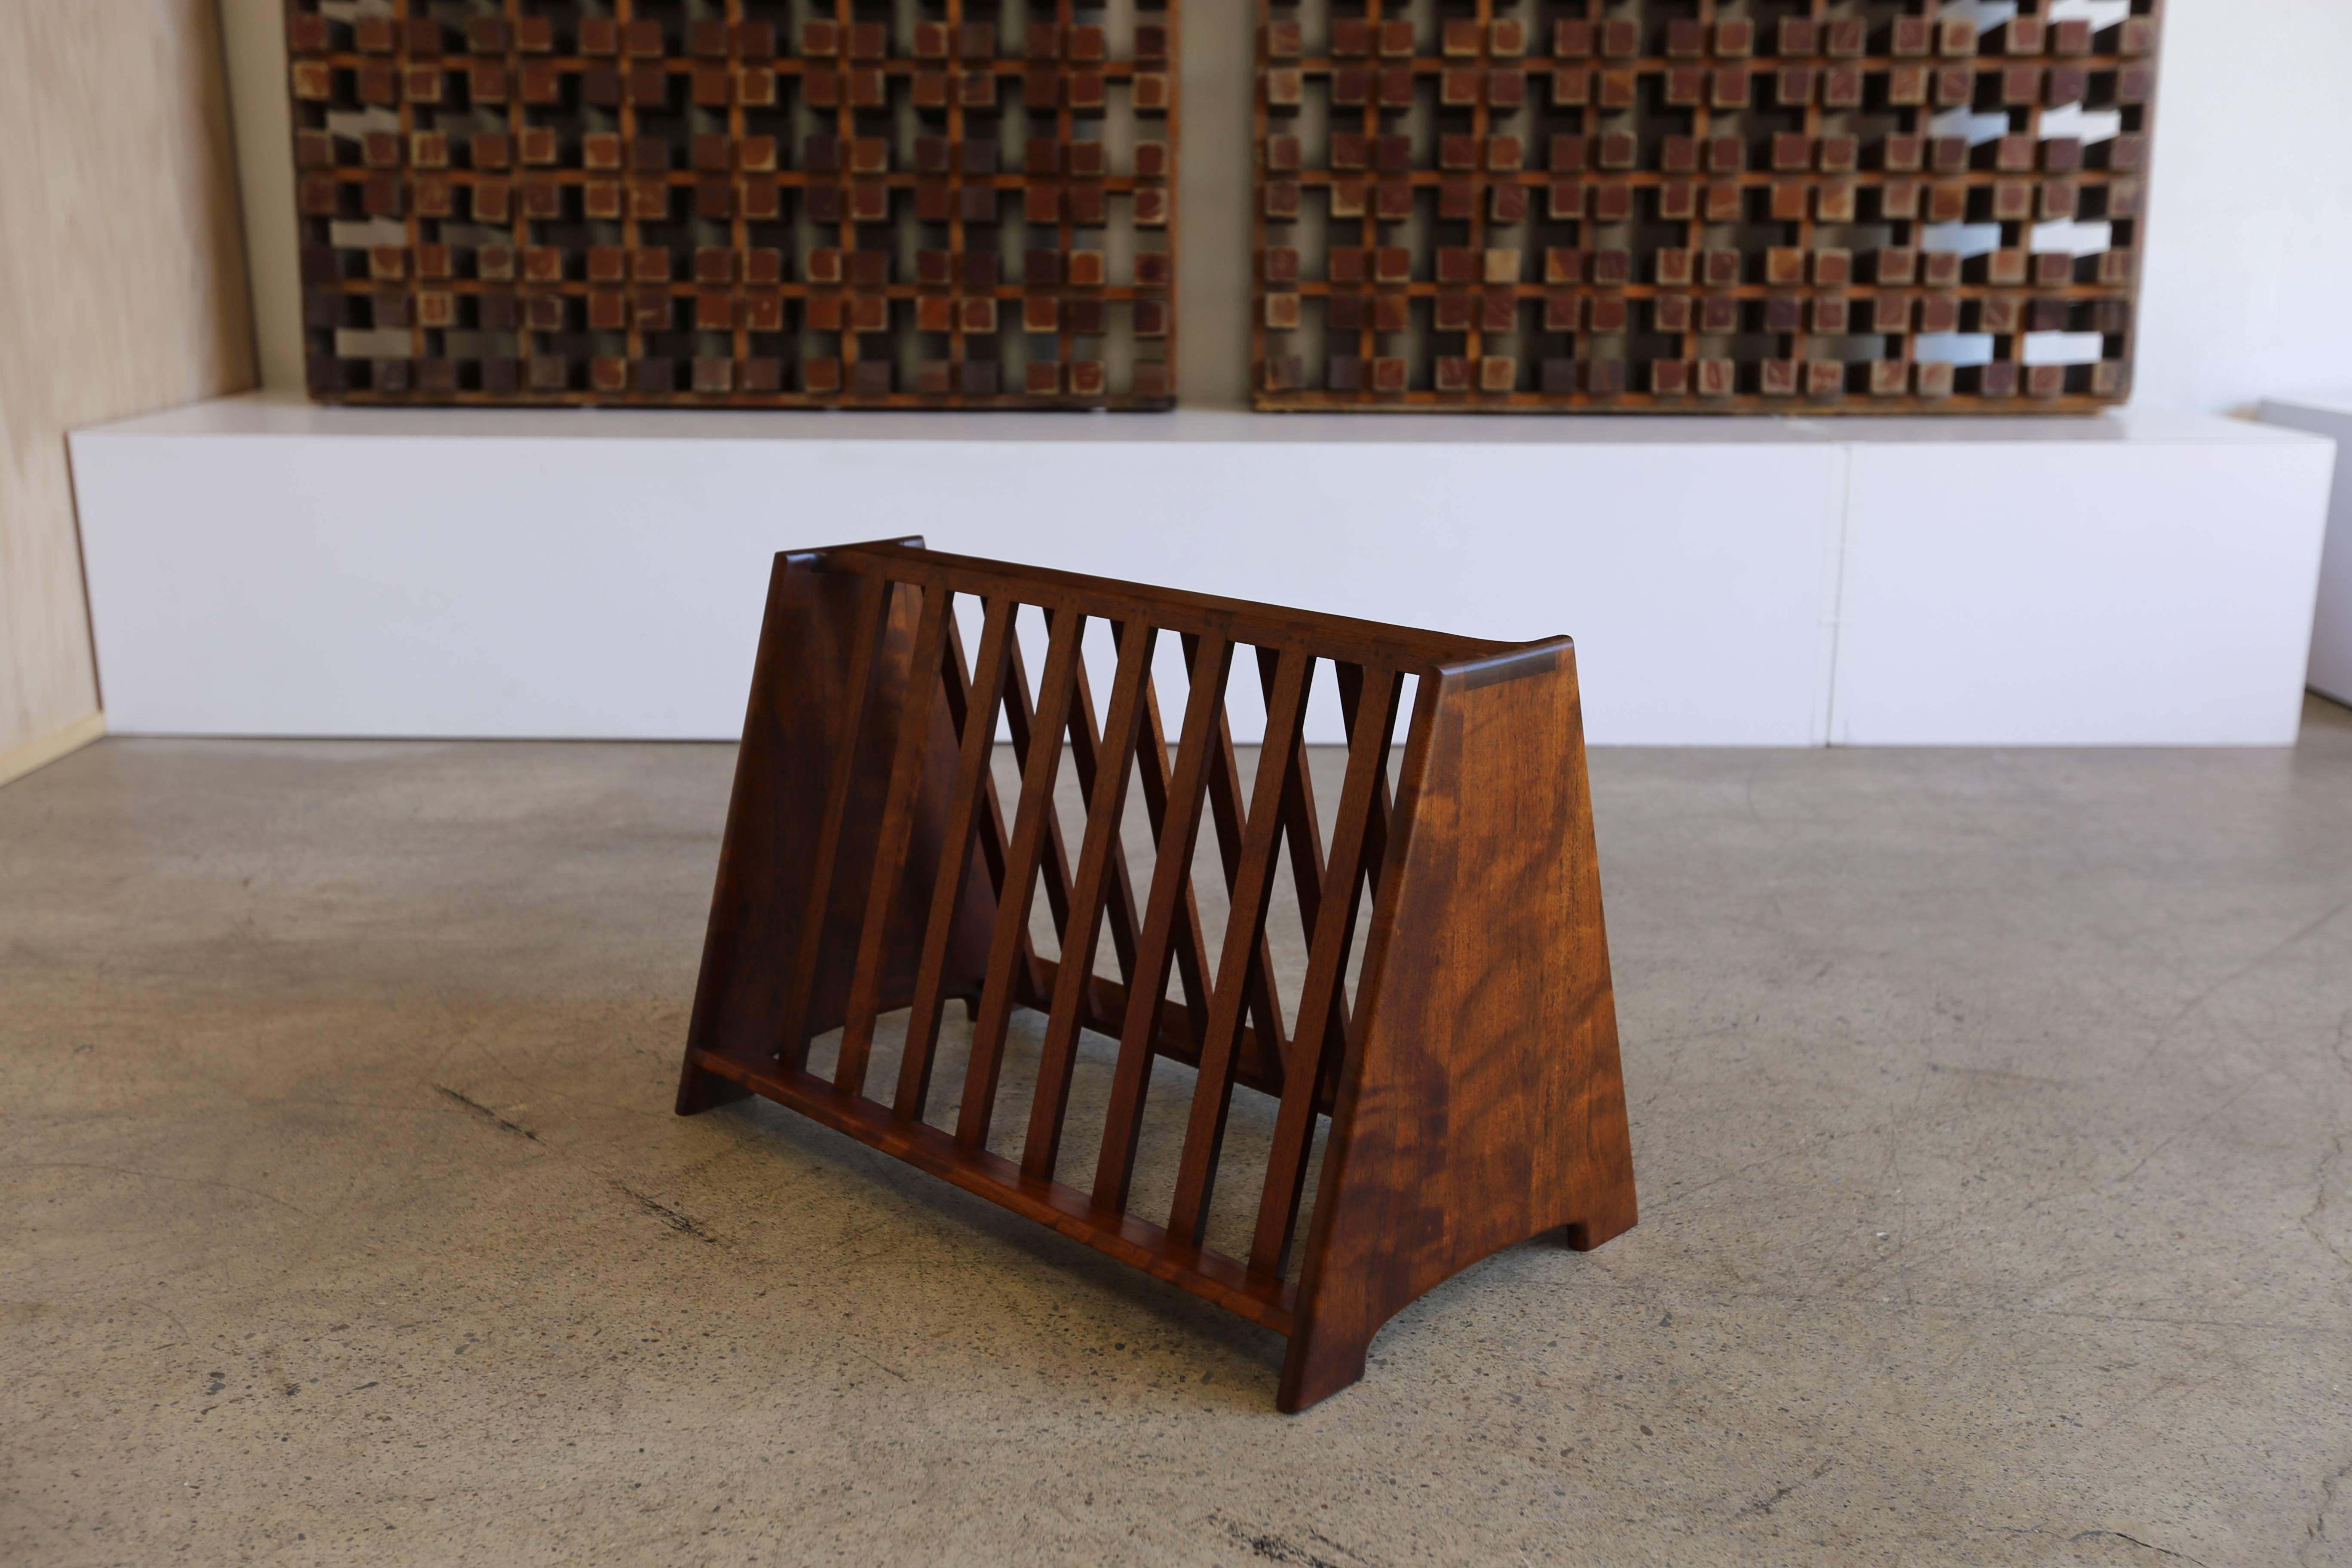 Handcrafted Shedua wood magazine rack by John Nyquist. This piece is sold with the original handwritten paperwork from John Nyquist, 1968.